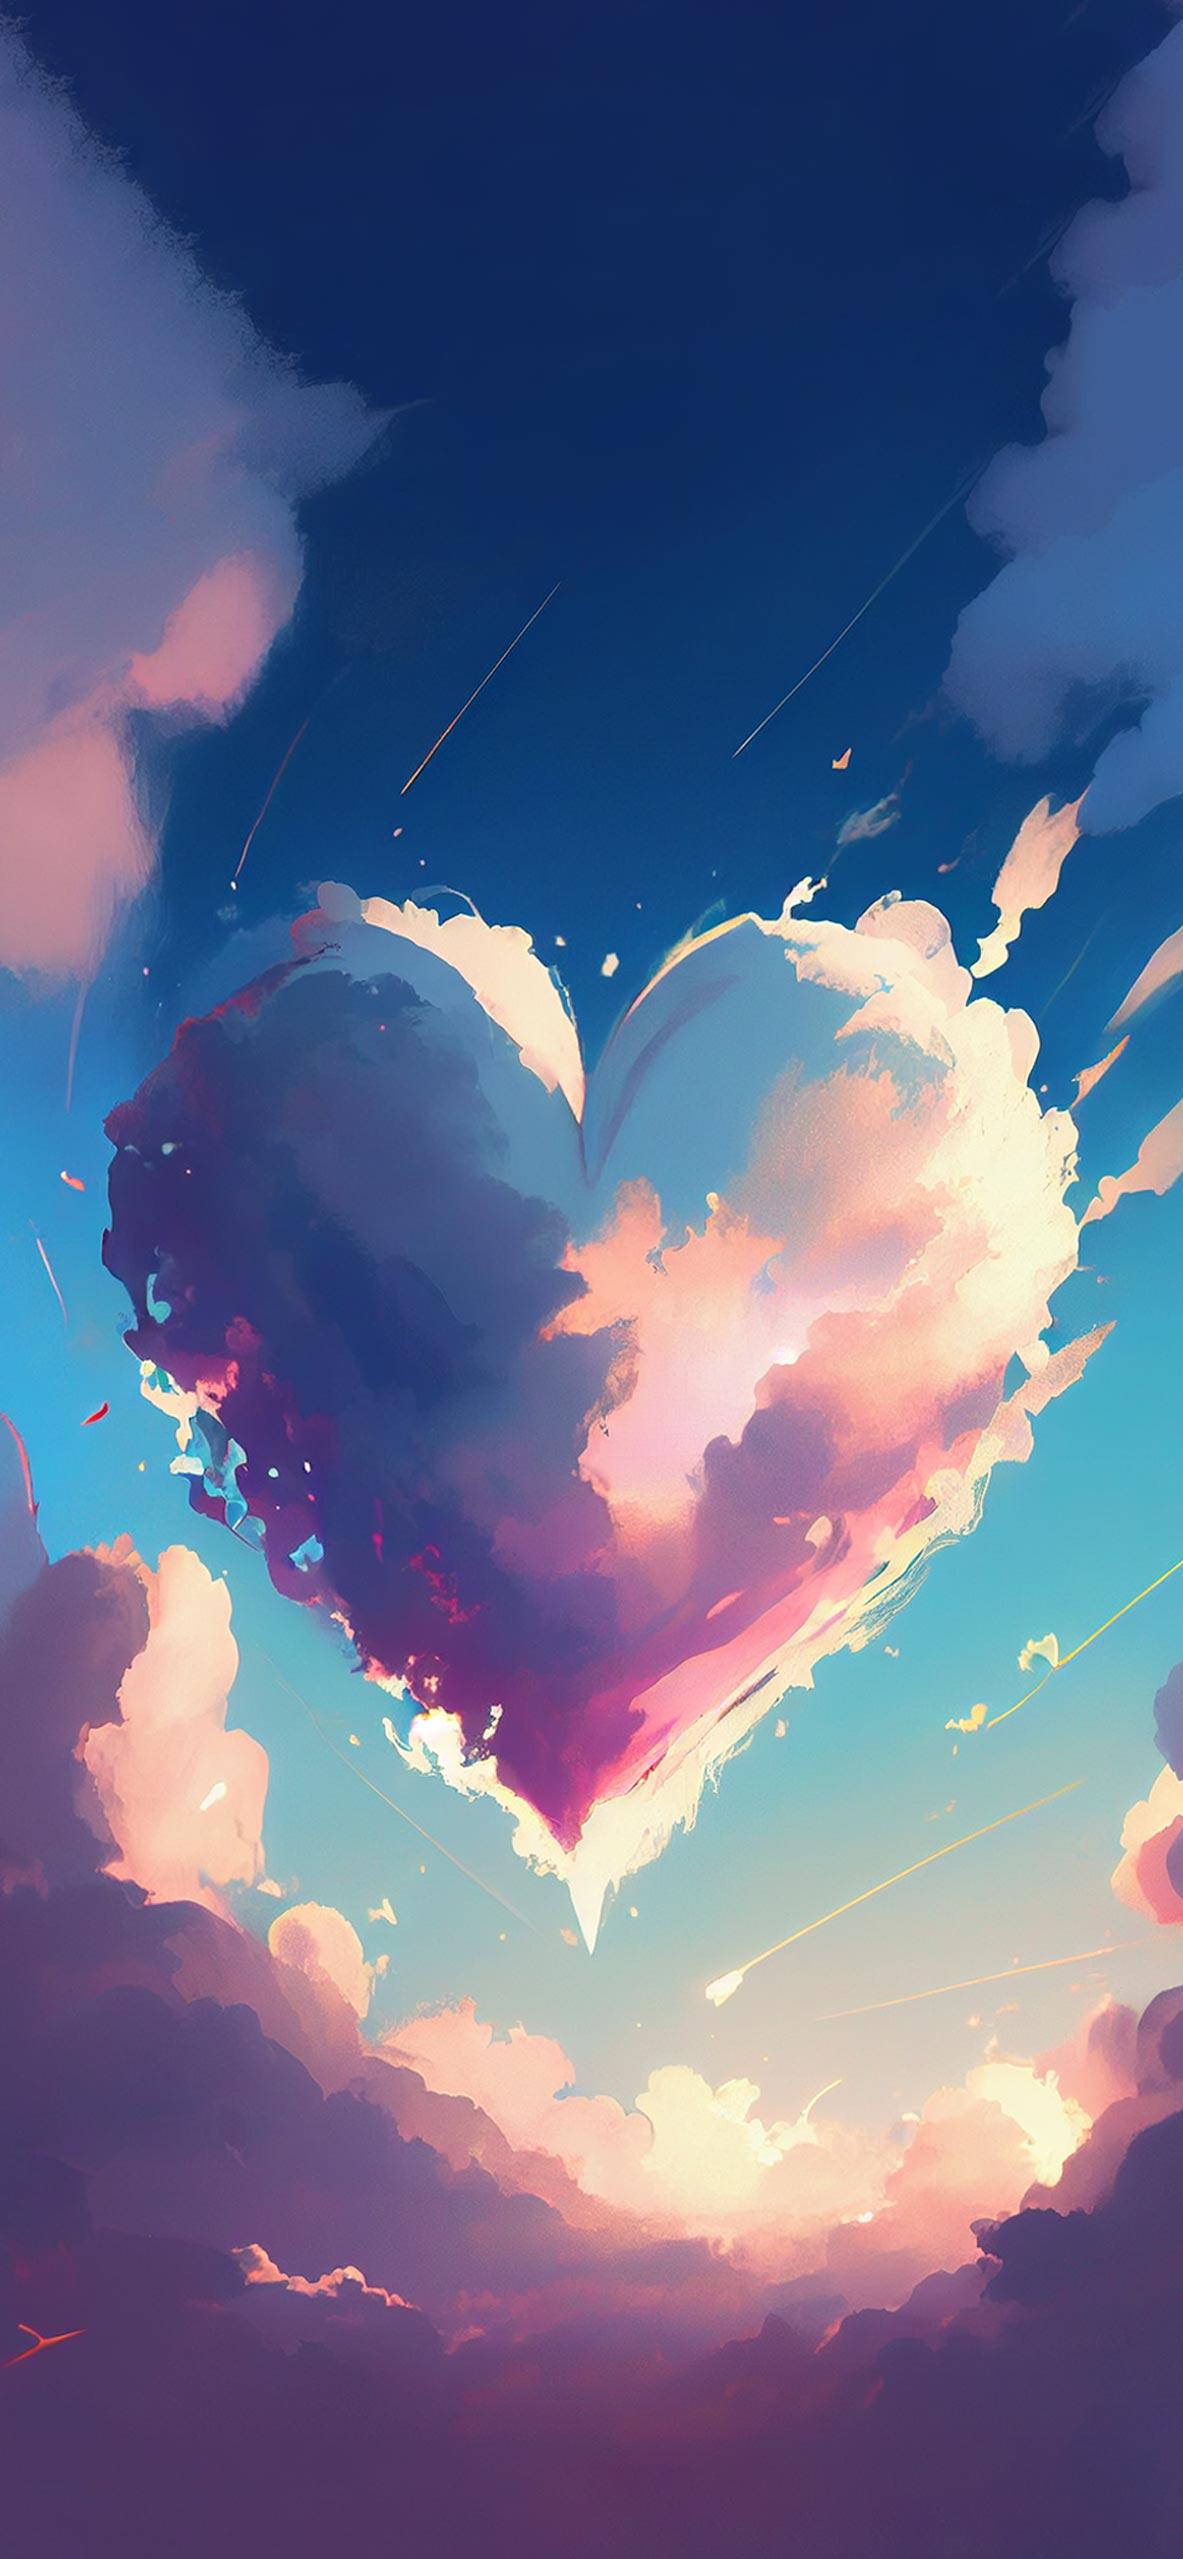 Clouds Heart Aesthetic Wallpapers Clouds Aesthetic Wallpapers